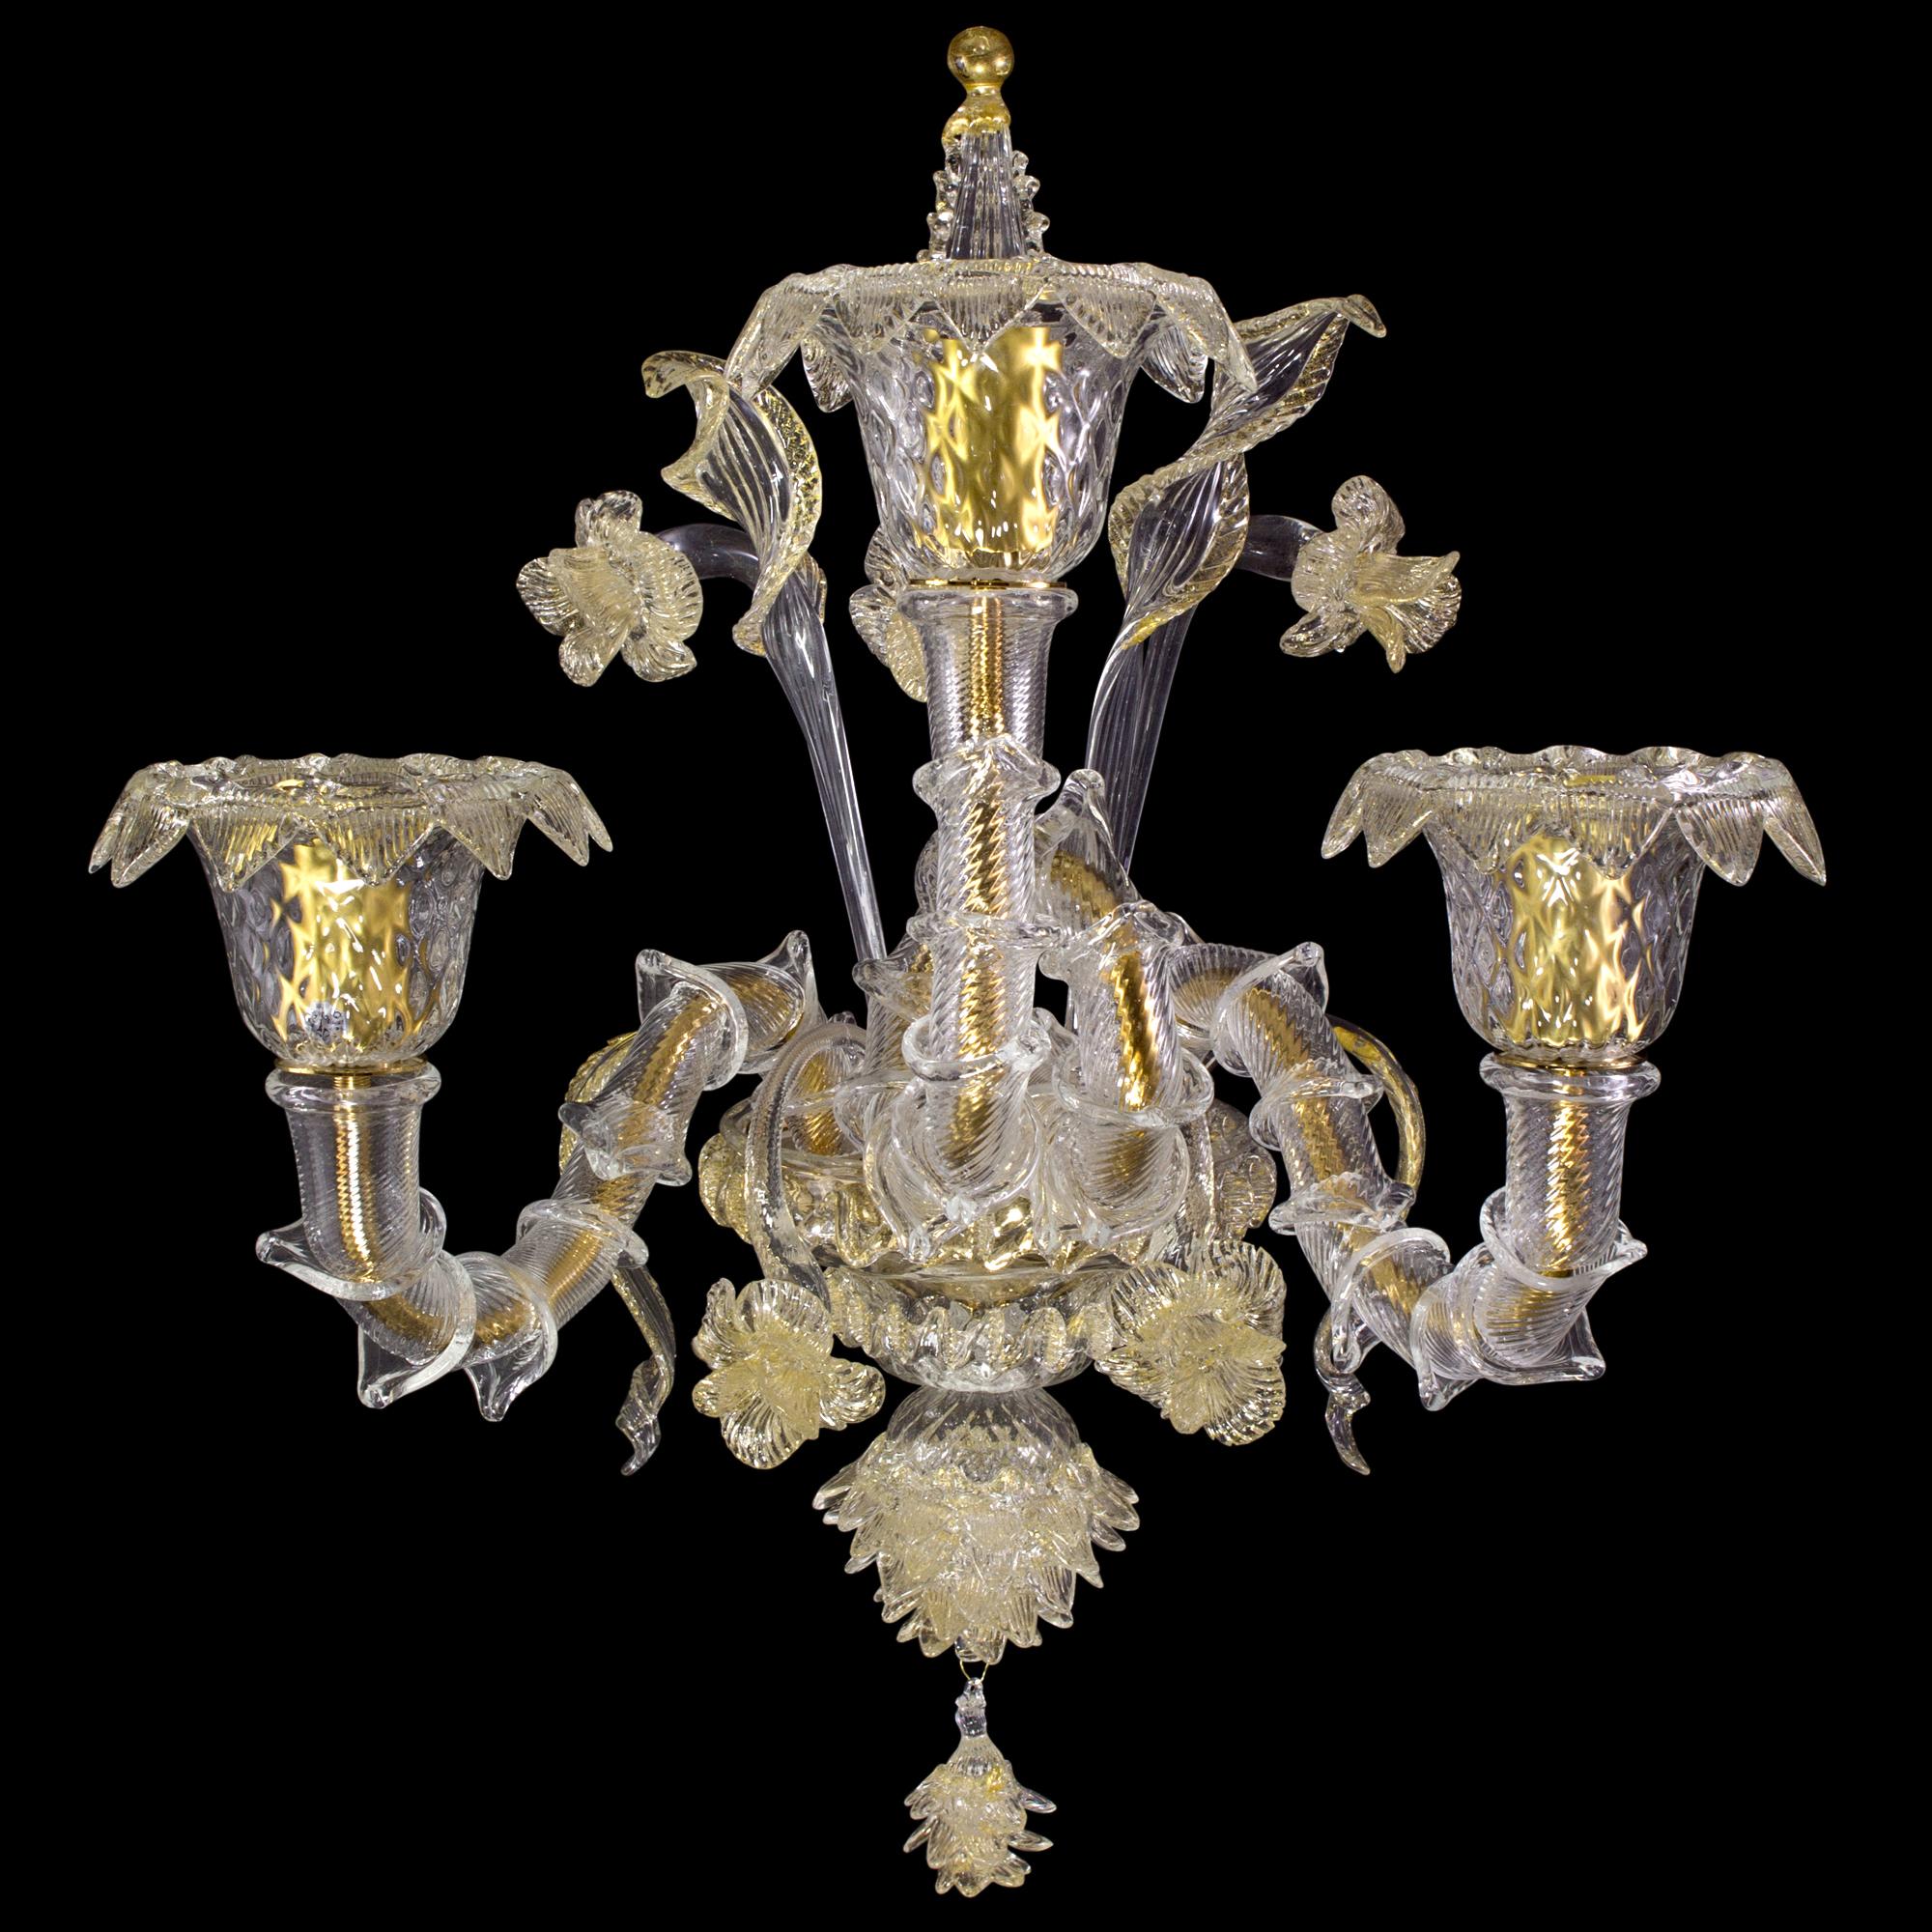 Artistic Rezzonico Sconce 3 lights crystal-gold Murano glass by Multiforme.
The name of this collection evokes tha magic and exotic atmosphere of the arabian nights; the blown glass chandelier Sherazade is one of our collection that stands out